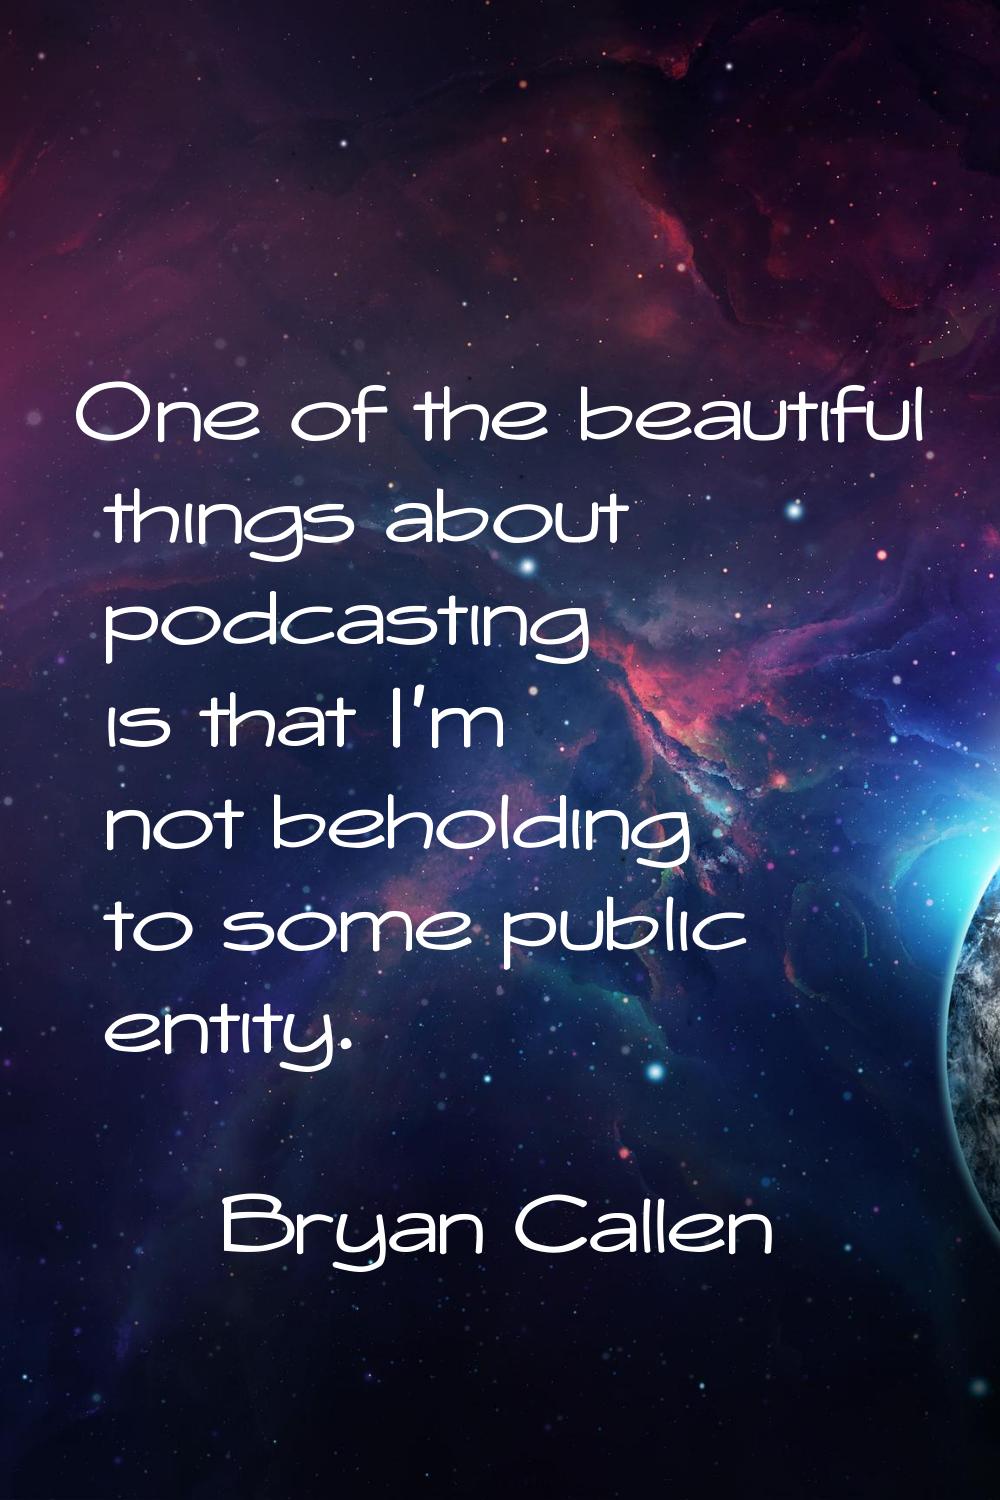 One of the beautiful things about podcasting is that I'm not beholding to some public entity.